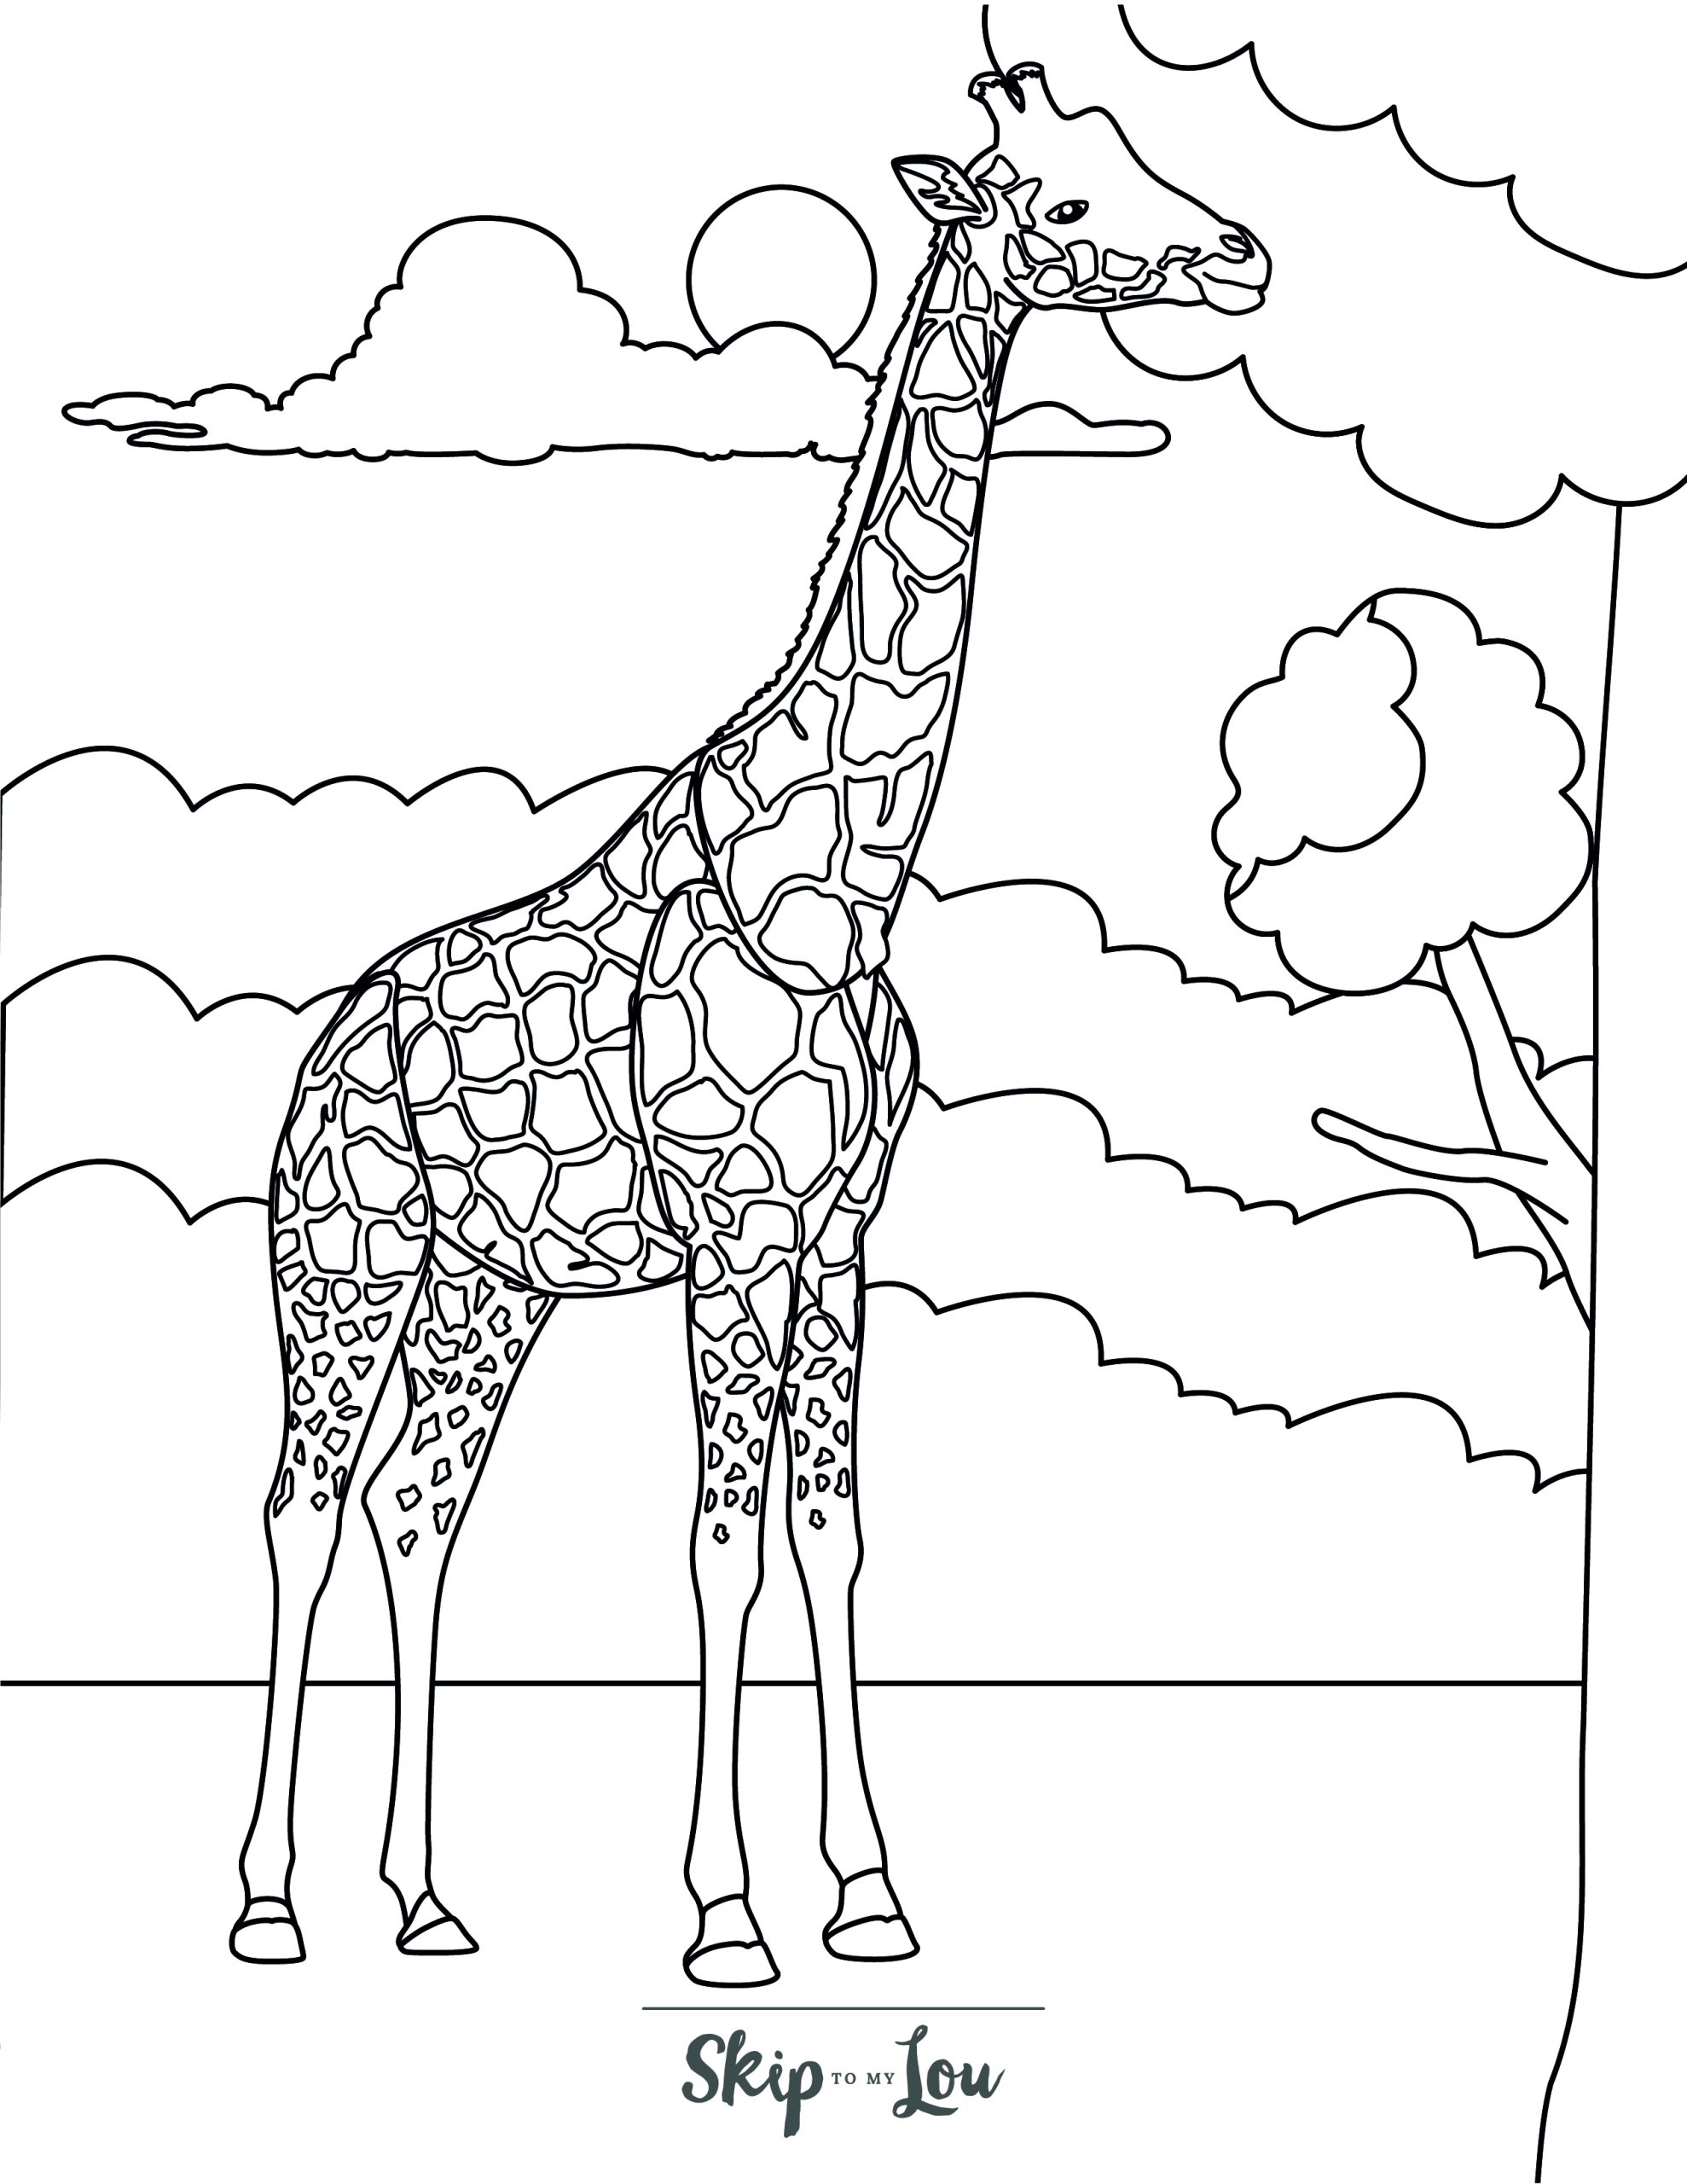 Free giraffe coloring pages to download and print skip to my lou